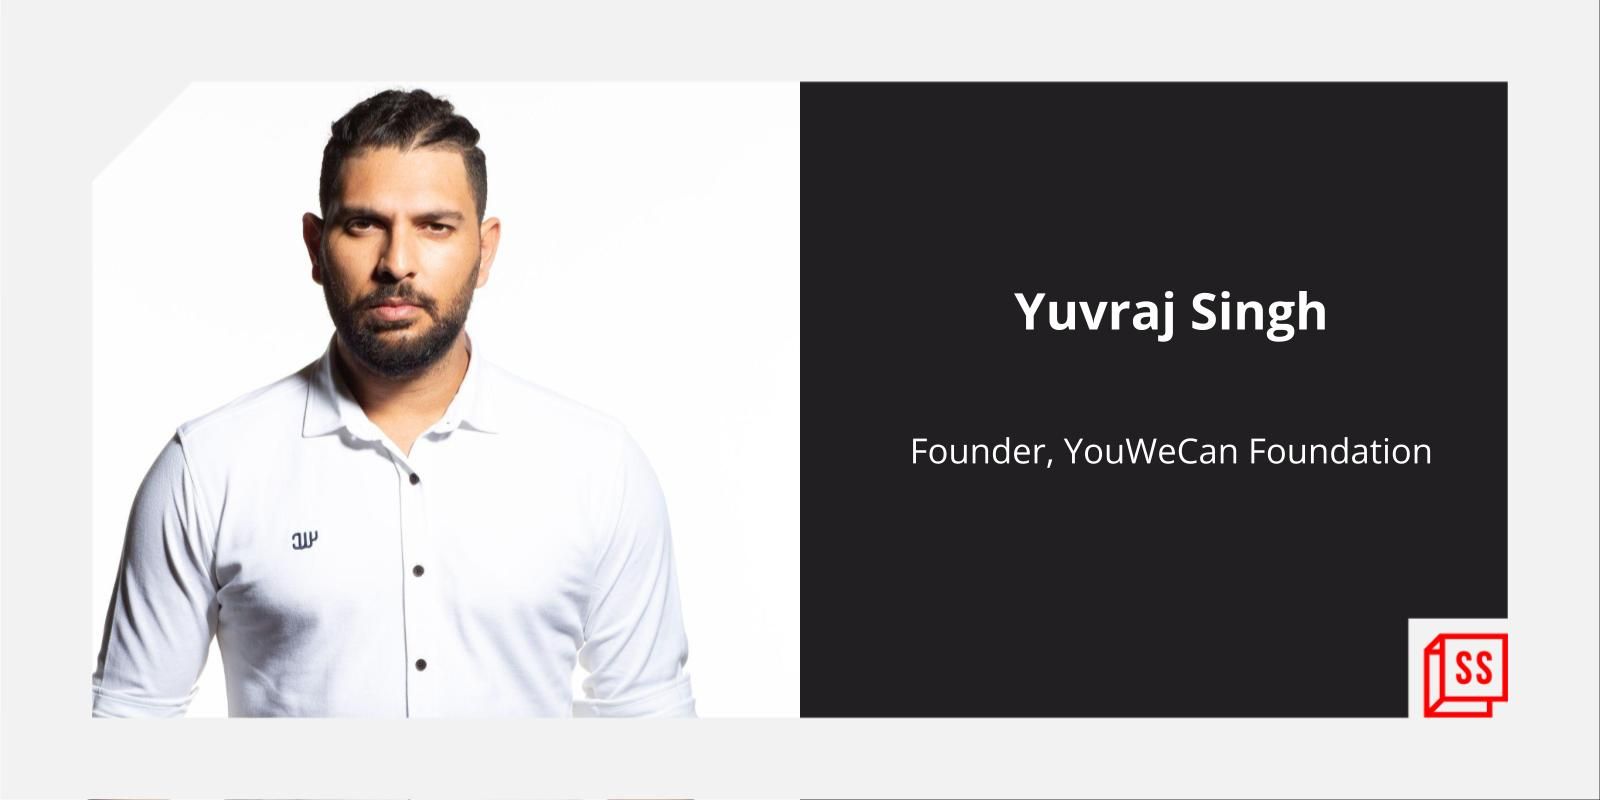 How cricketer Yuvraj Singh’s YouWeCan Foundation is strengthening India’s health infrastructure